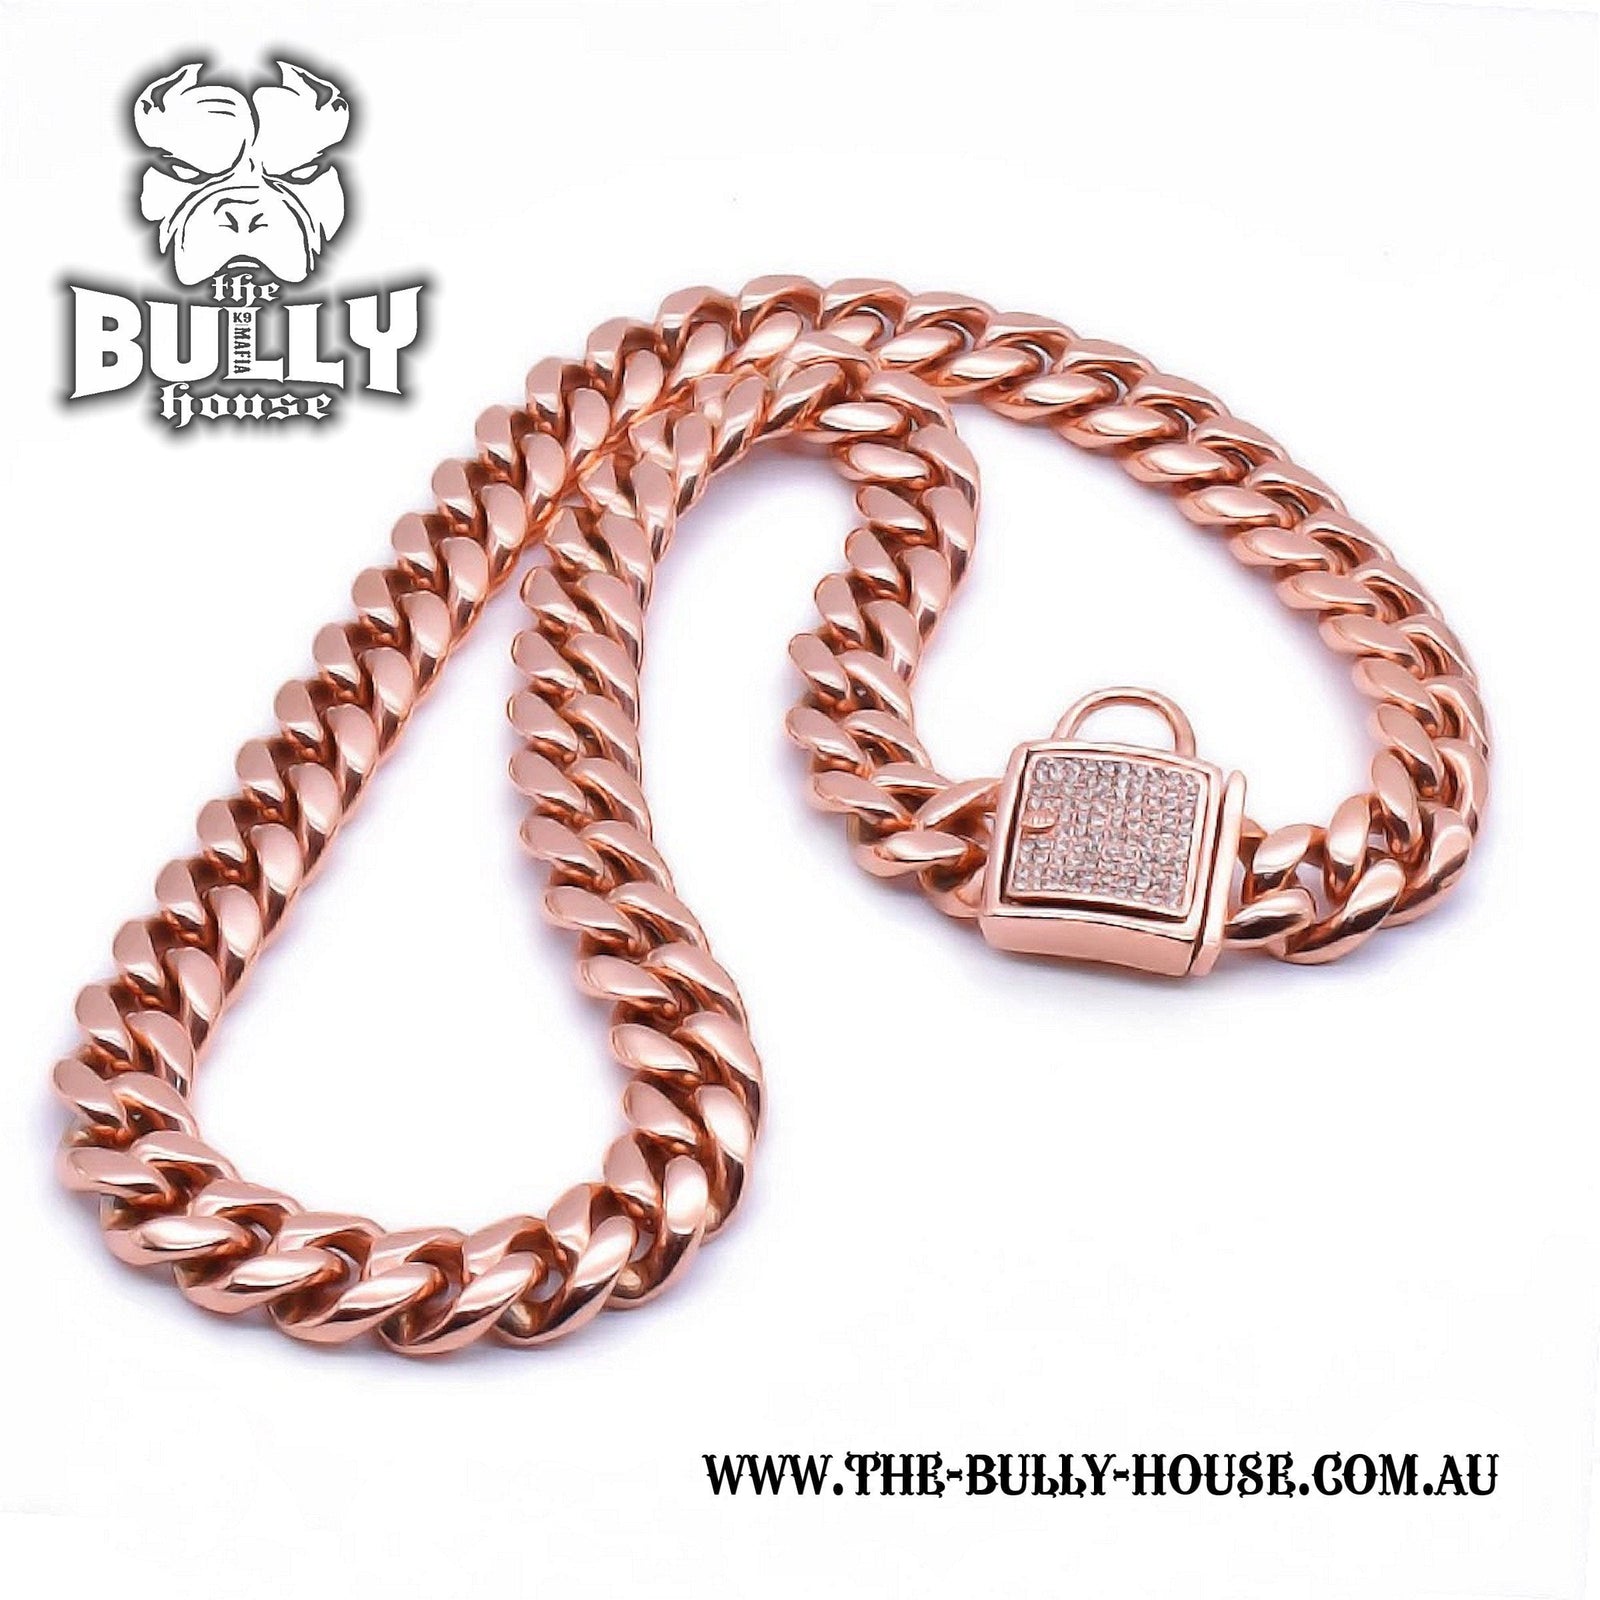 (Pre Order Now - Arriving approx end of DEC) The Bully House "MIAMI Diamond Padlock" - ROSE GOLD 14mm Wide -